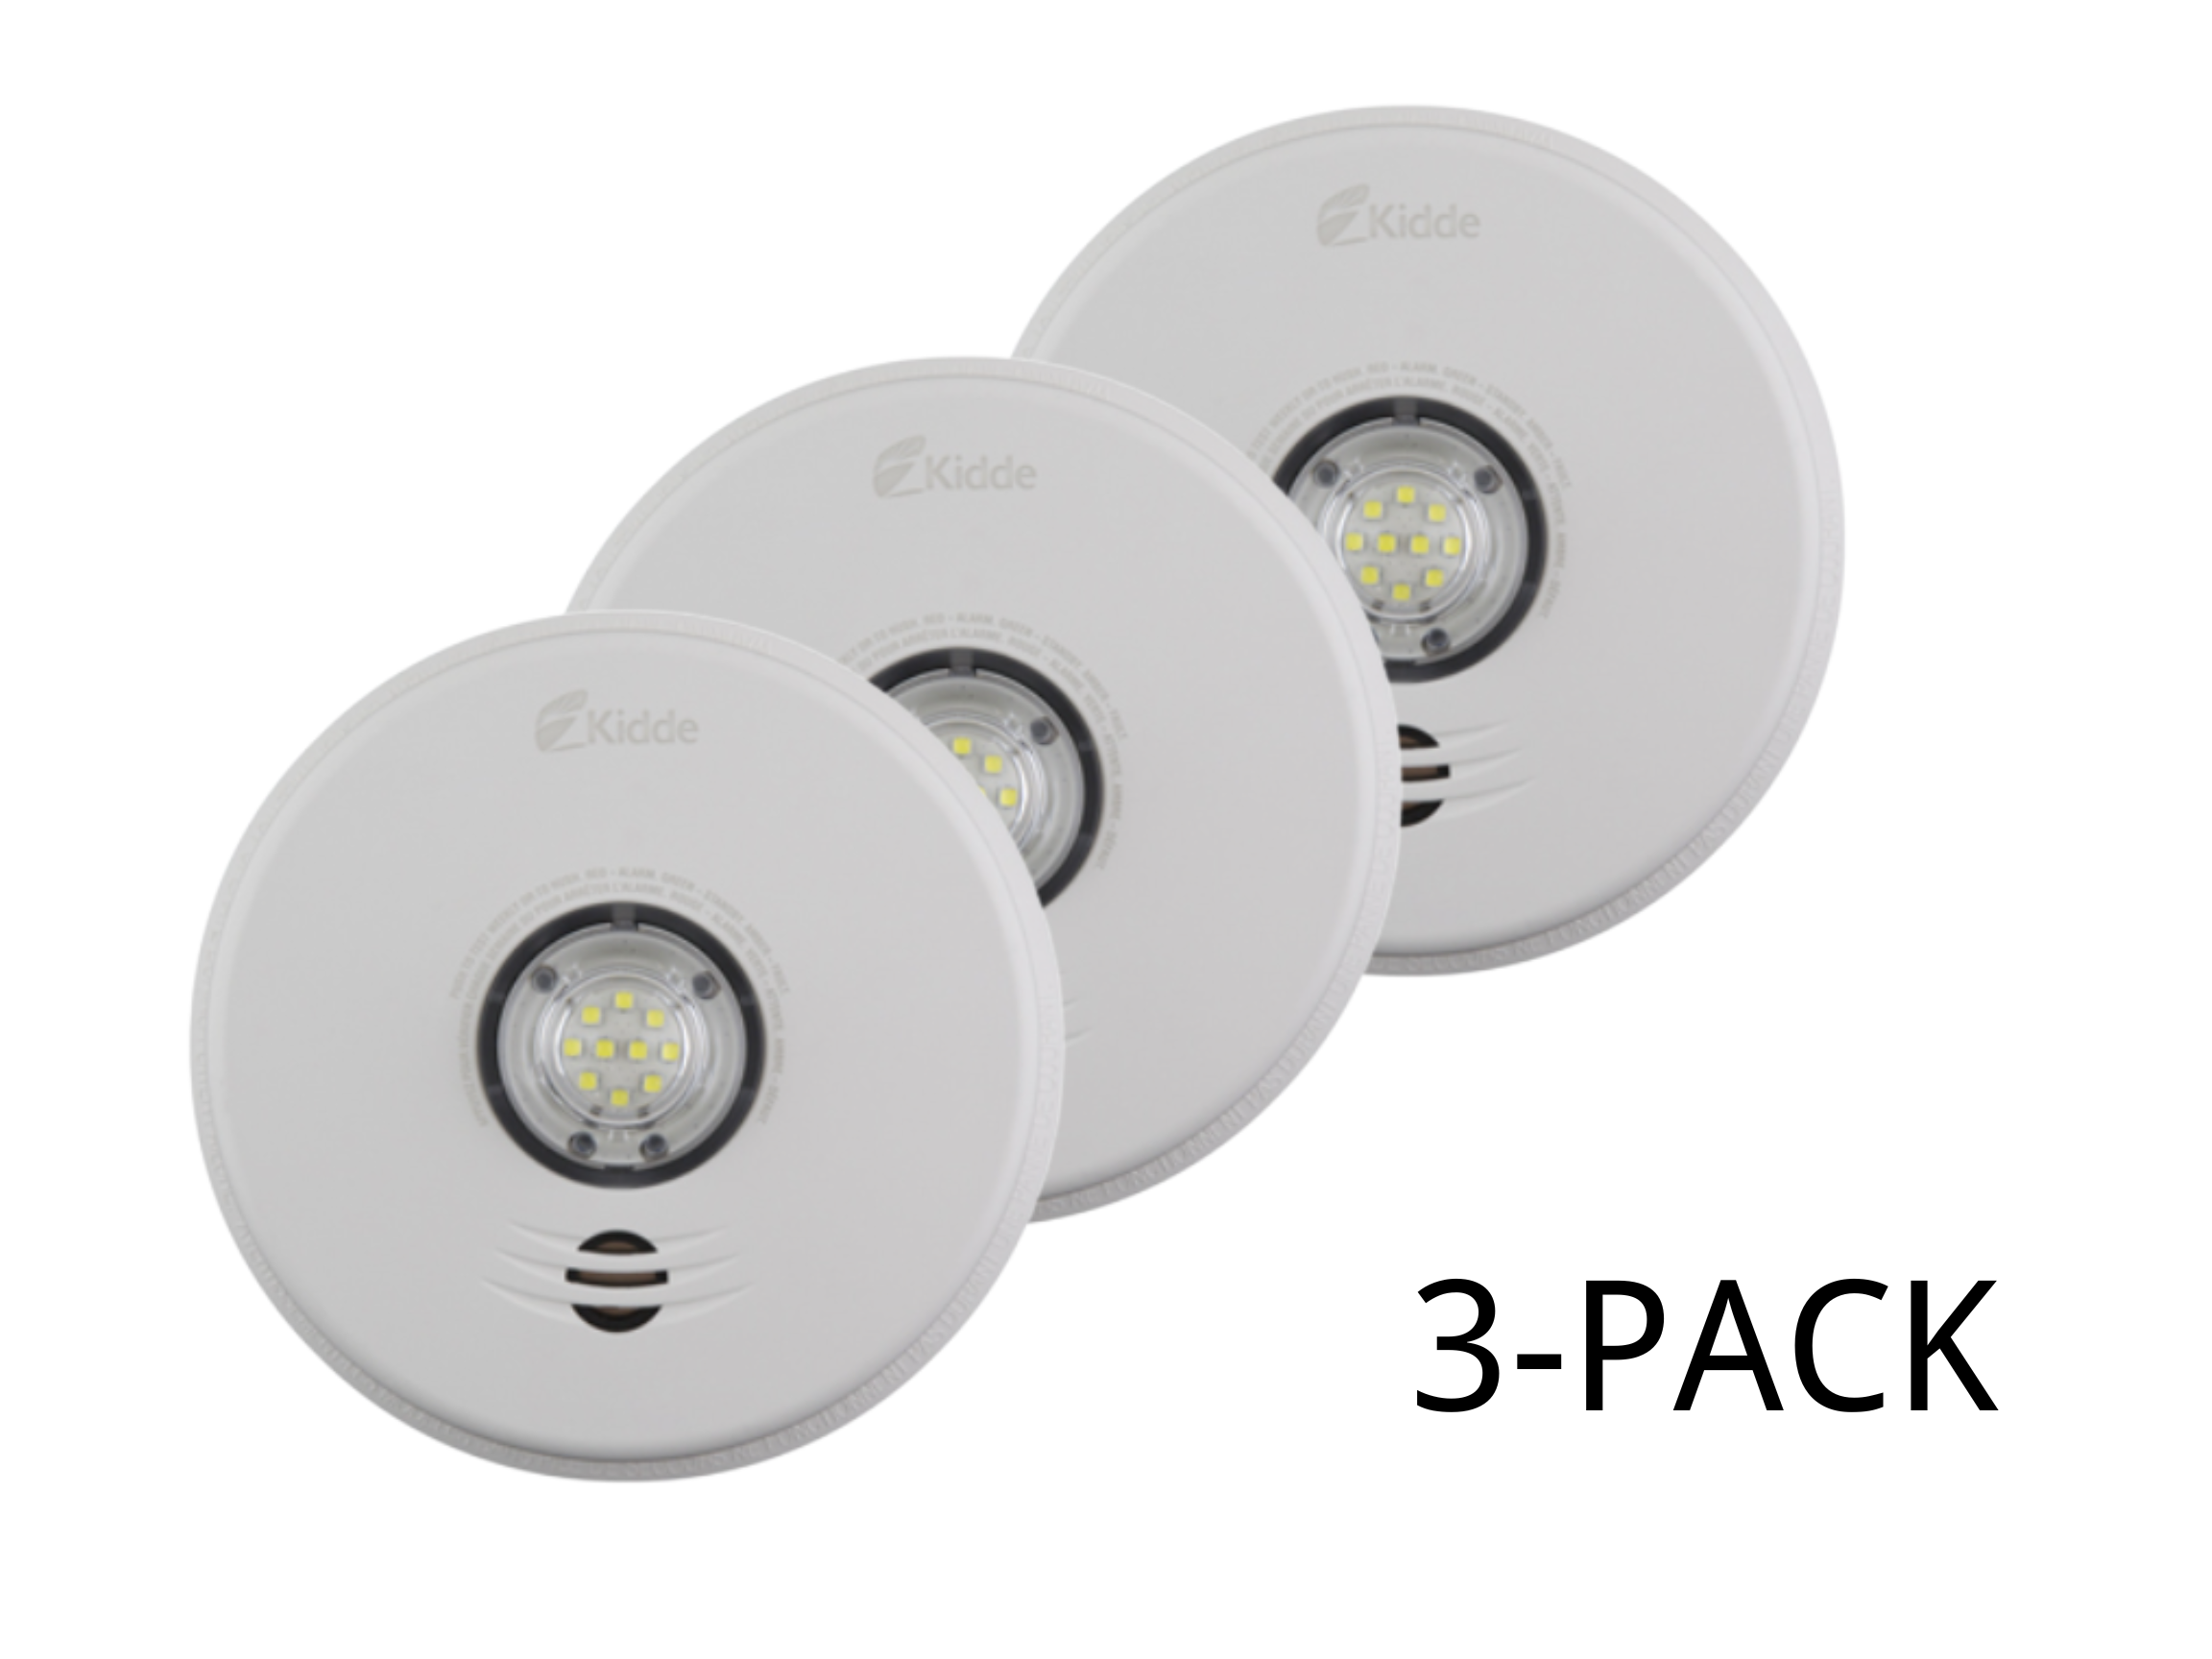 Kidde P4010ACLEDSCOCA-2, 3-IN-1 120V Integrated LED STROBE and 10-Year Talking Smoke & Carbon Monoxide Alarm 1PACK/3PACK